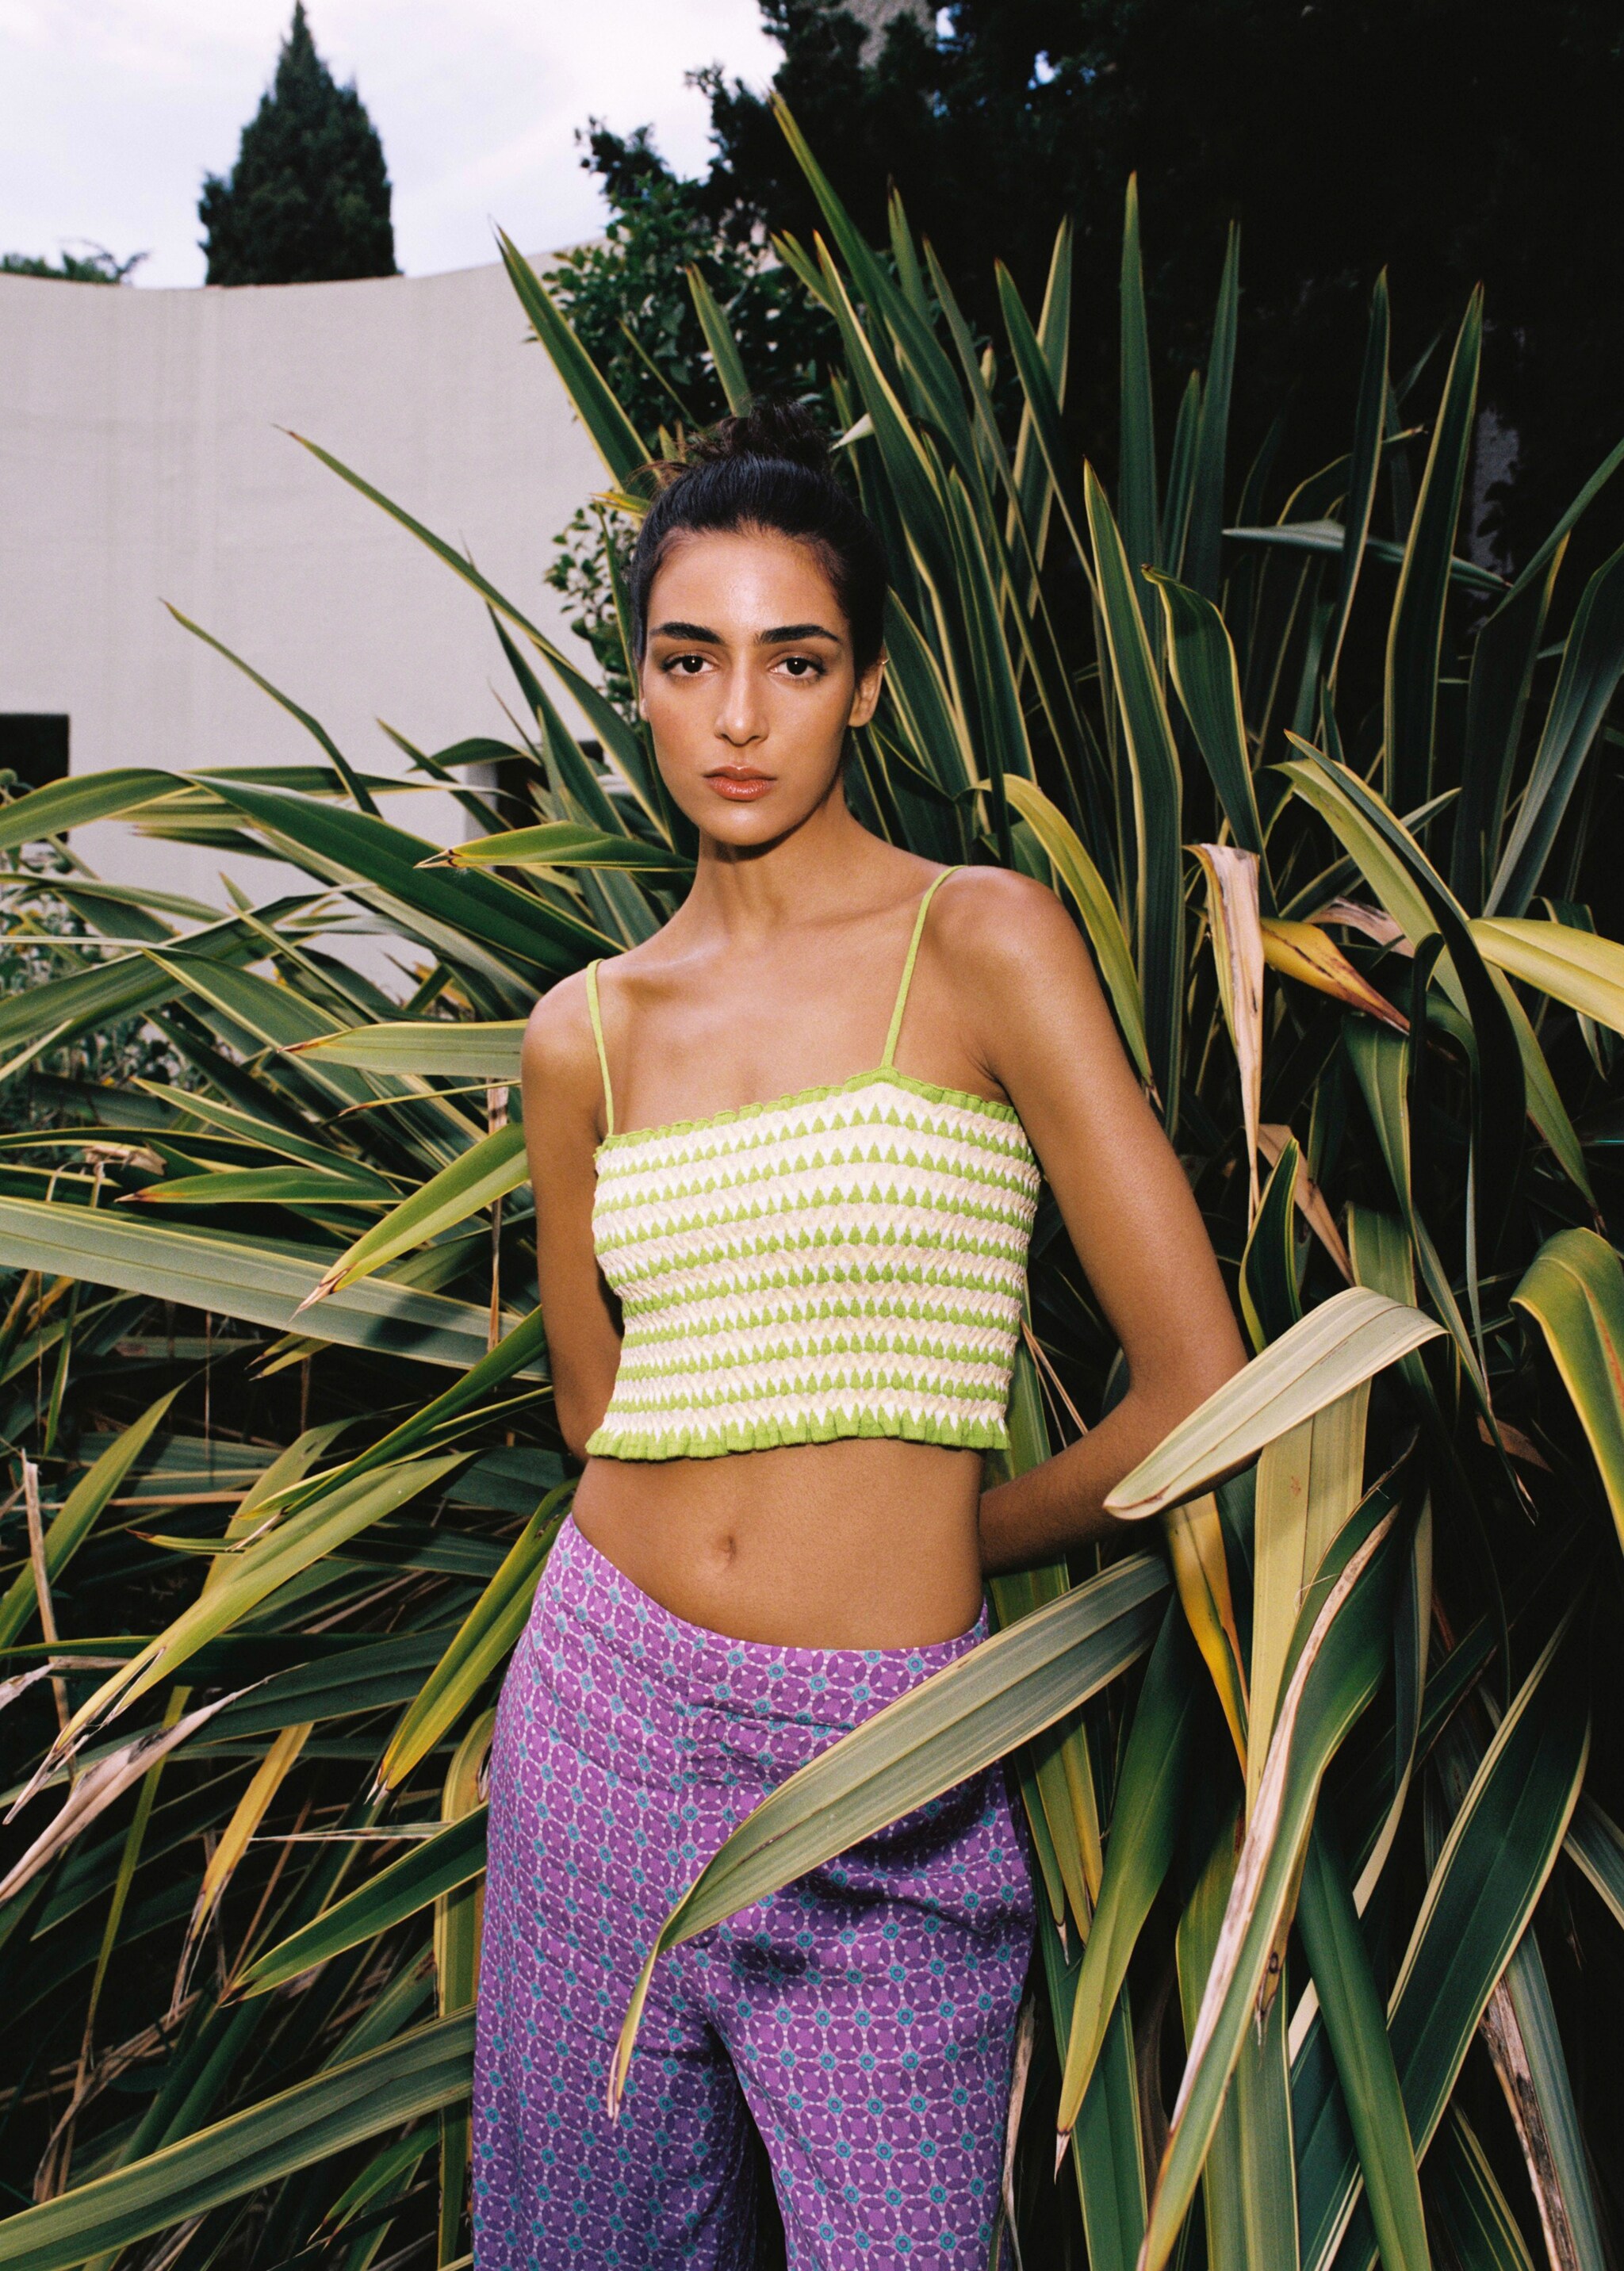 Striped crop top - Details of the article 6